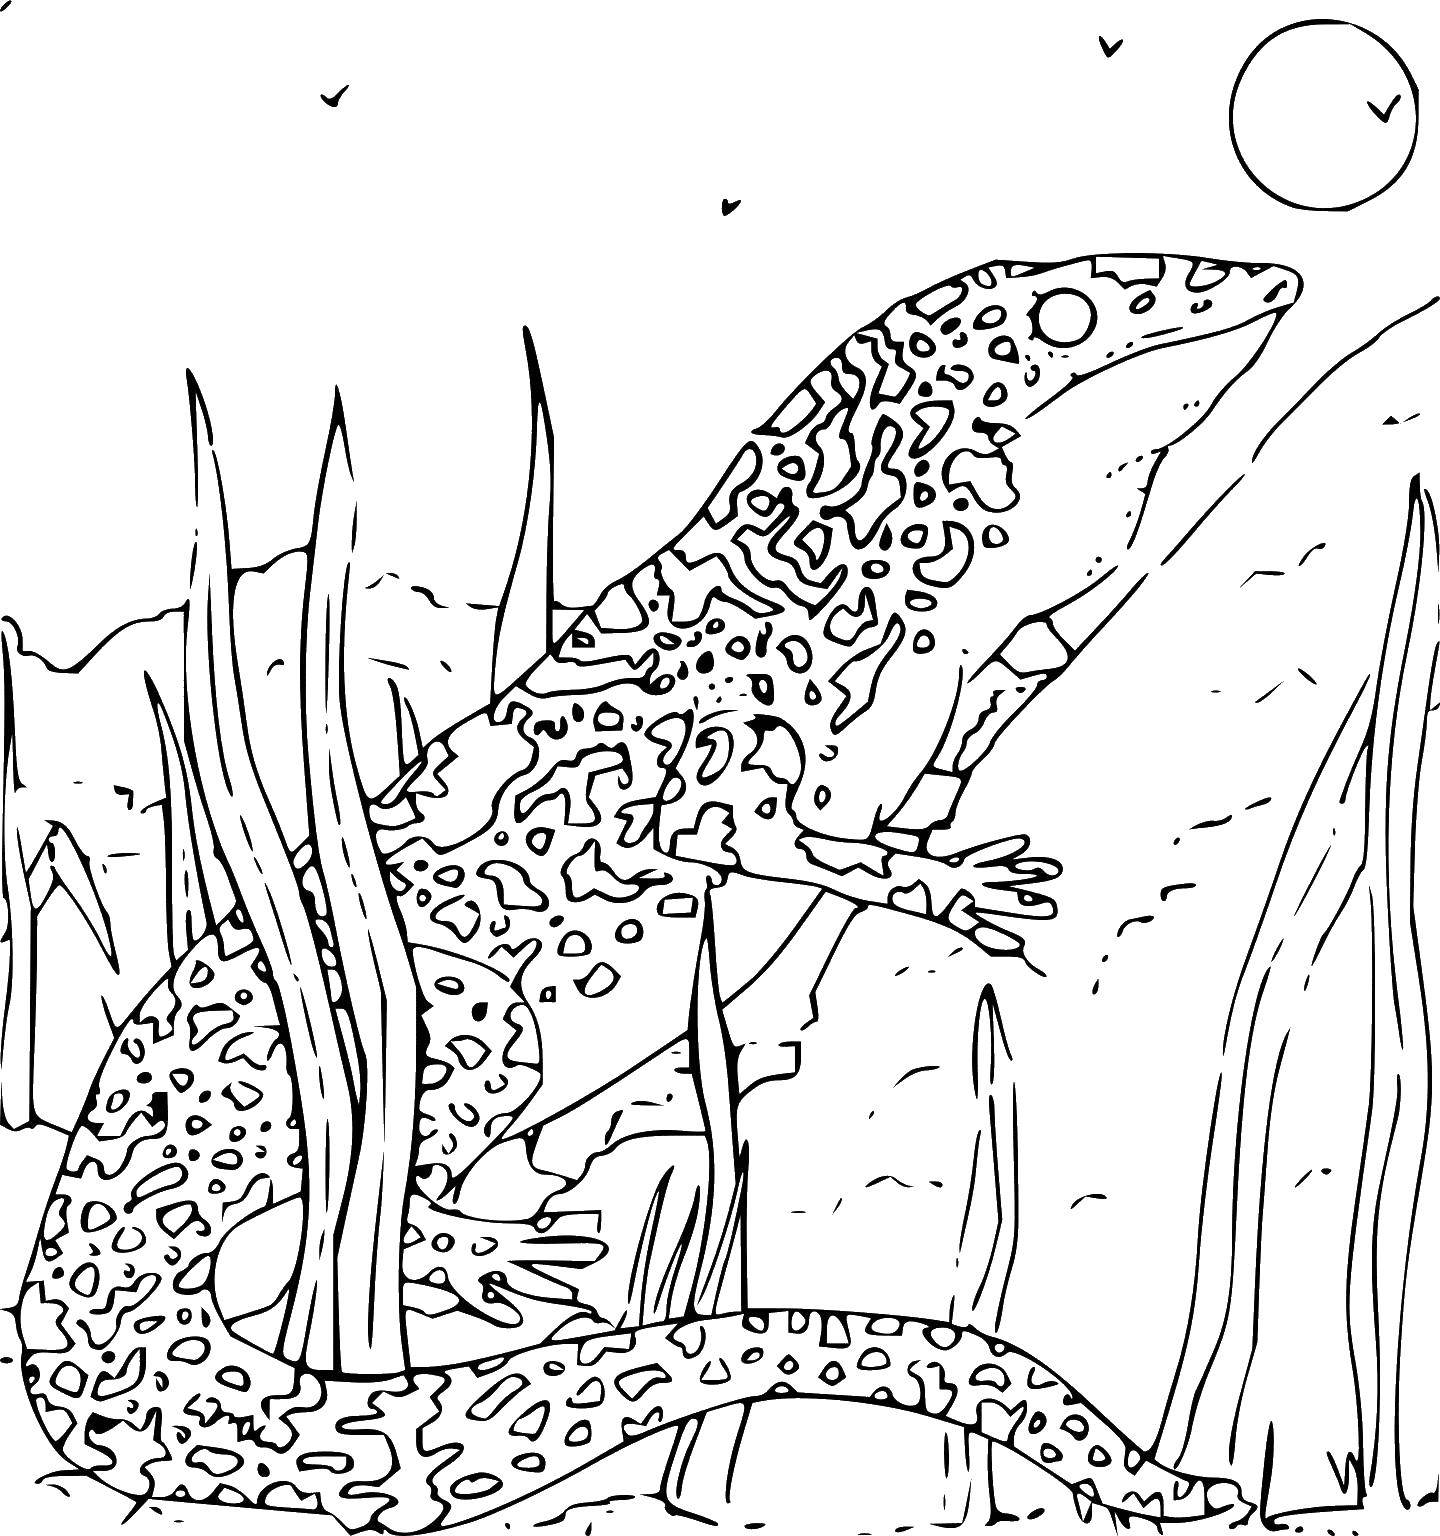 Coloring Lizard. Category Wild animals. Tags:  the lizard.